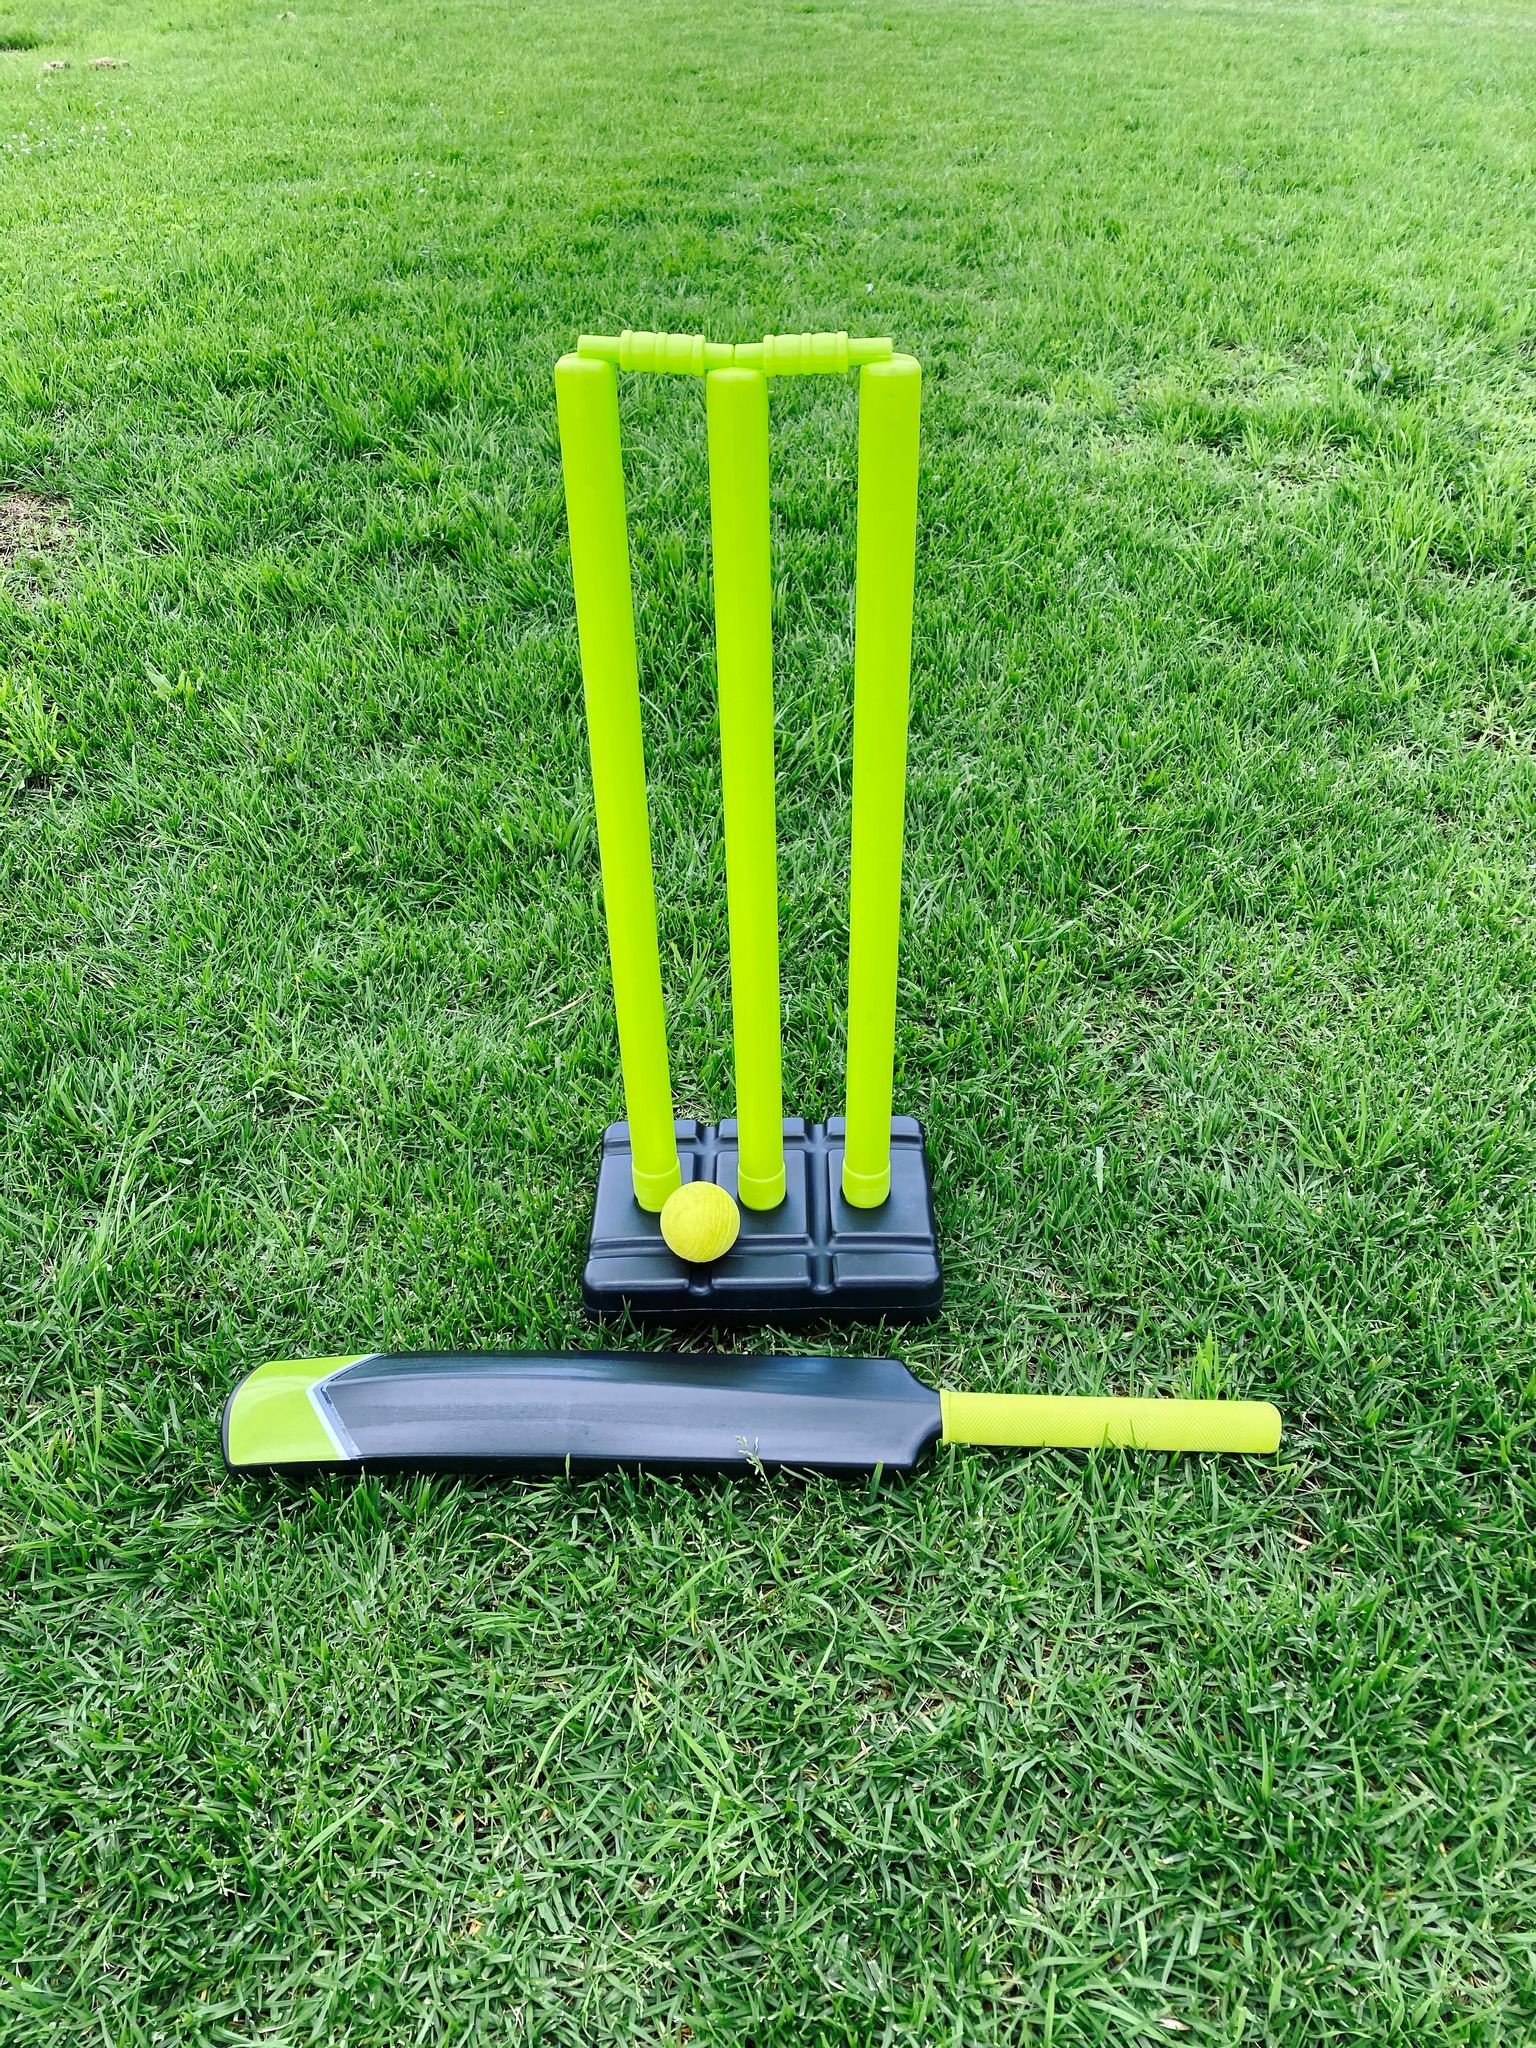 A photo of a fluro green set of plastic wickets, a ball, and a cricket bat sitting in a grassy field.